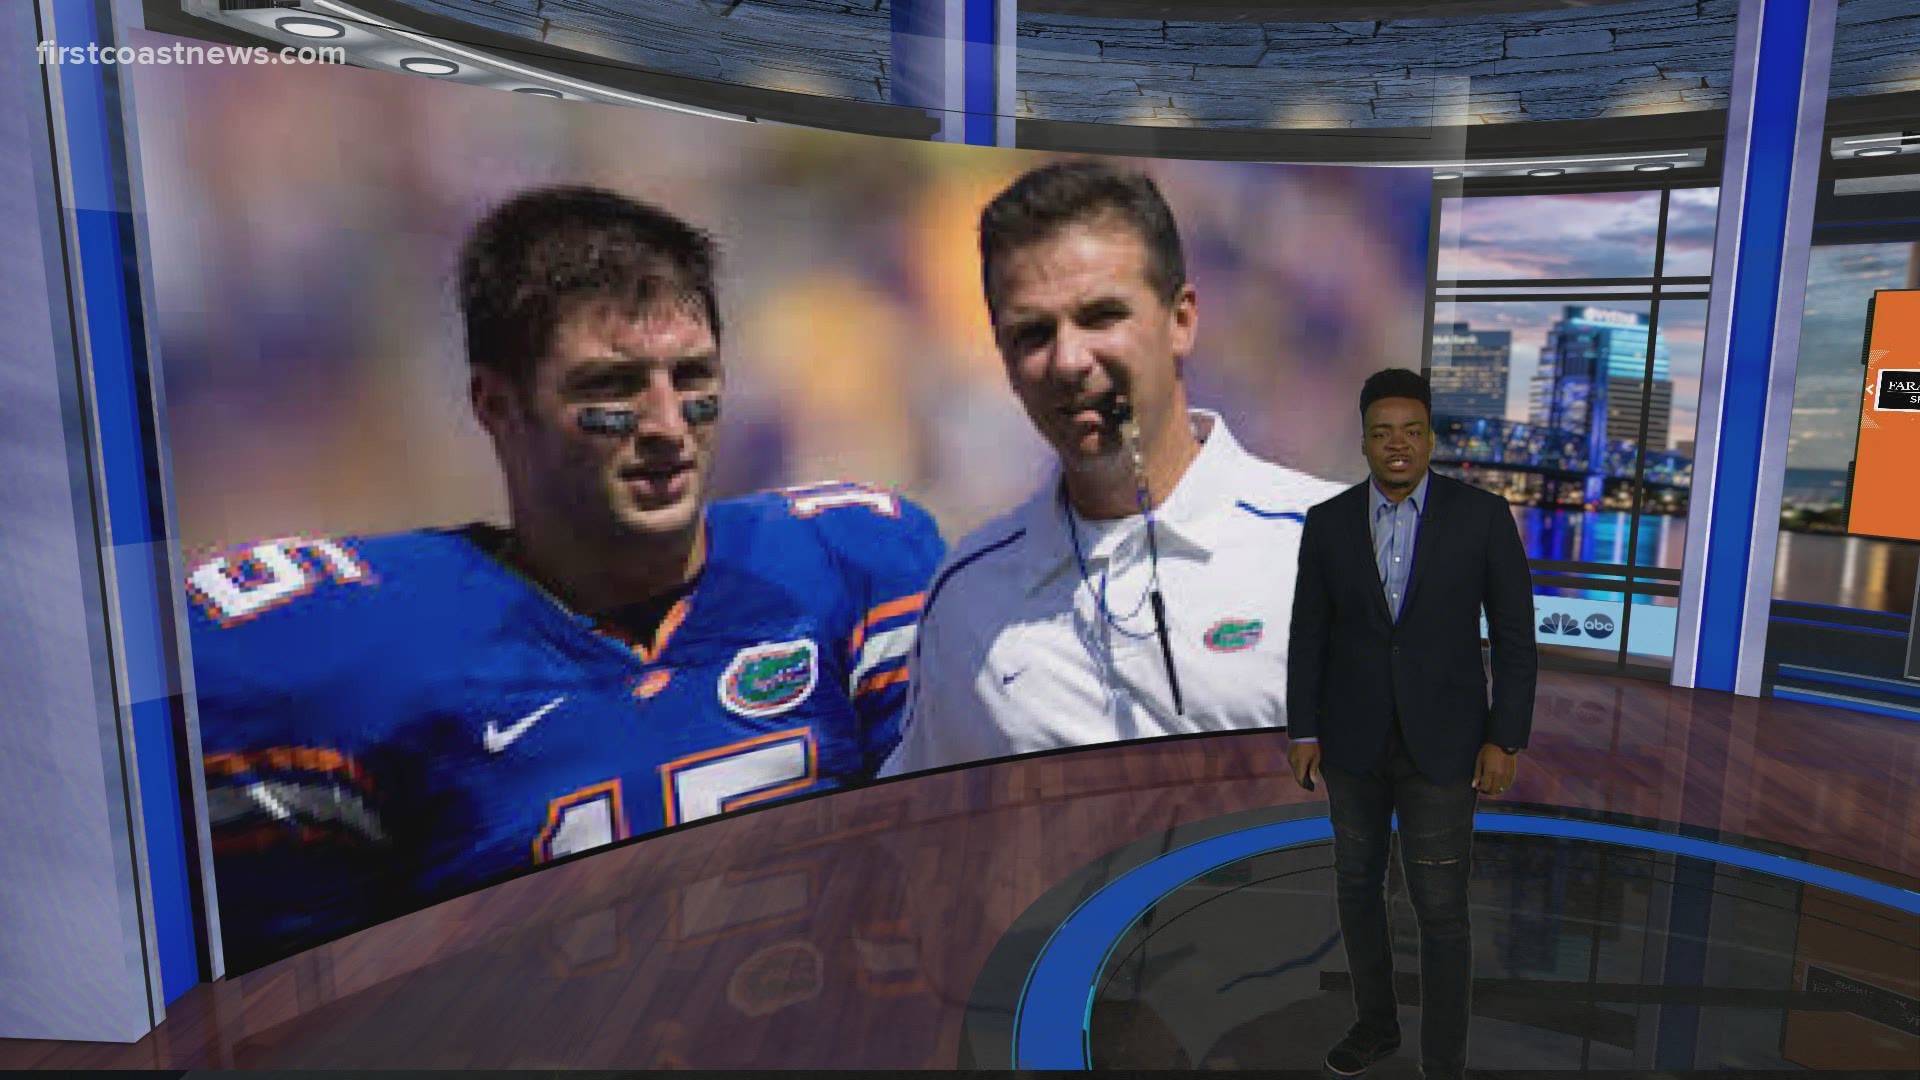 Tim Tebow won the Heisman Trophy and two national championships at Florida between 2006-2009 under Urban Meyer.